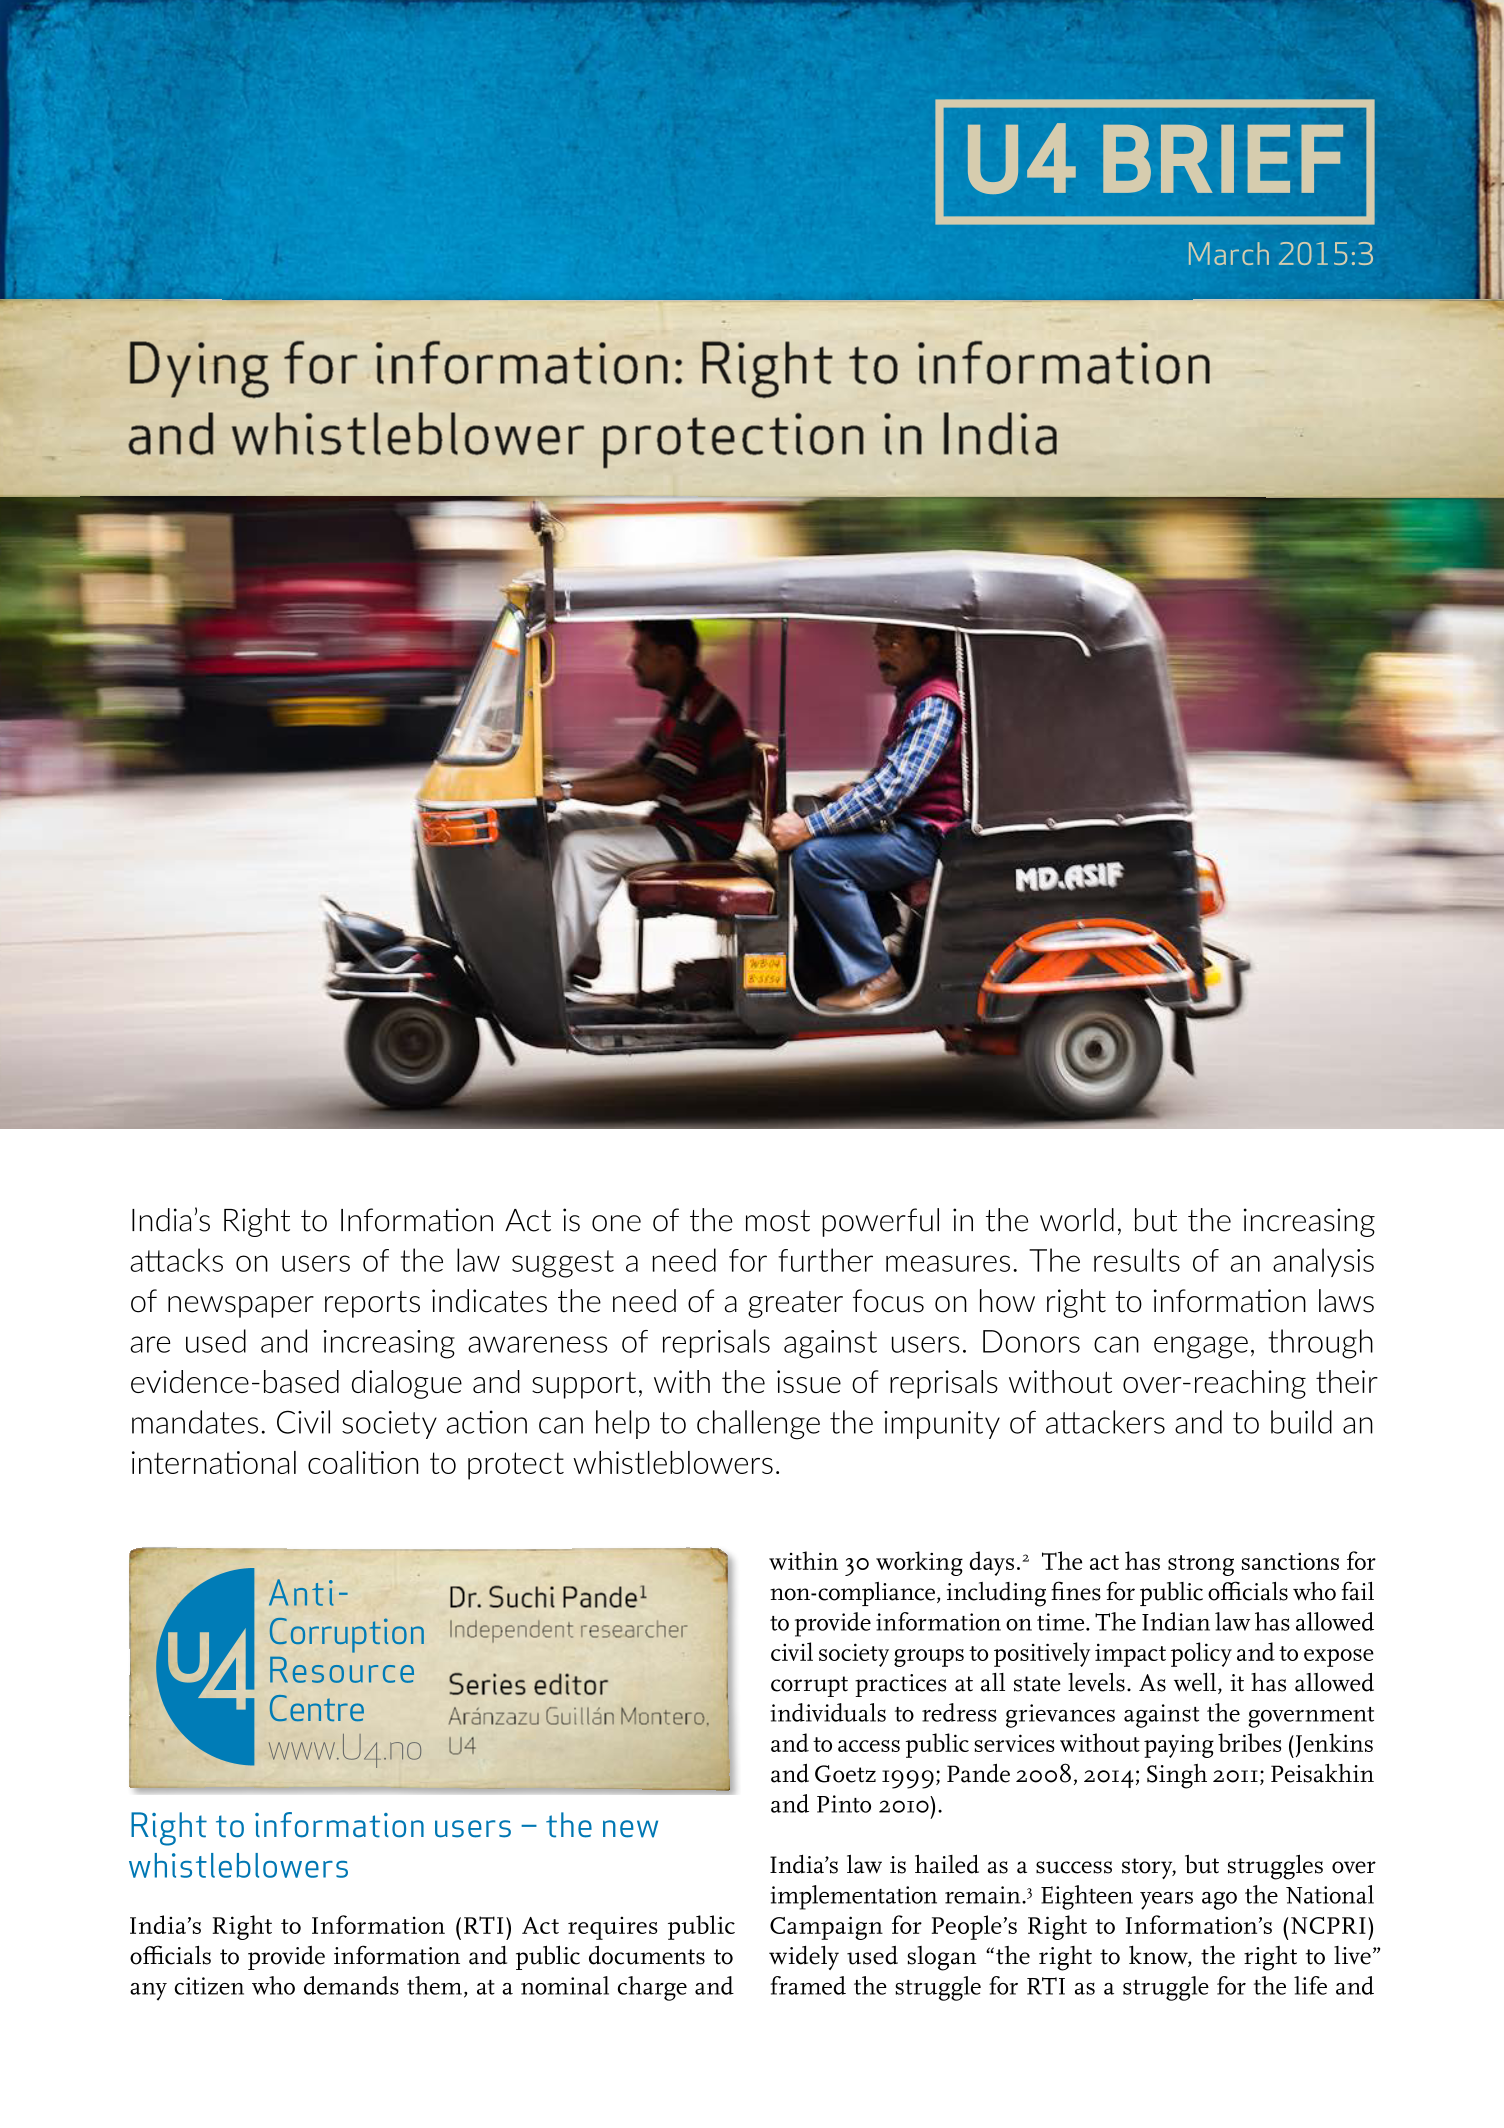 Dying for information: Right to information and whistleblower protection in India